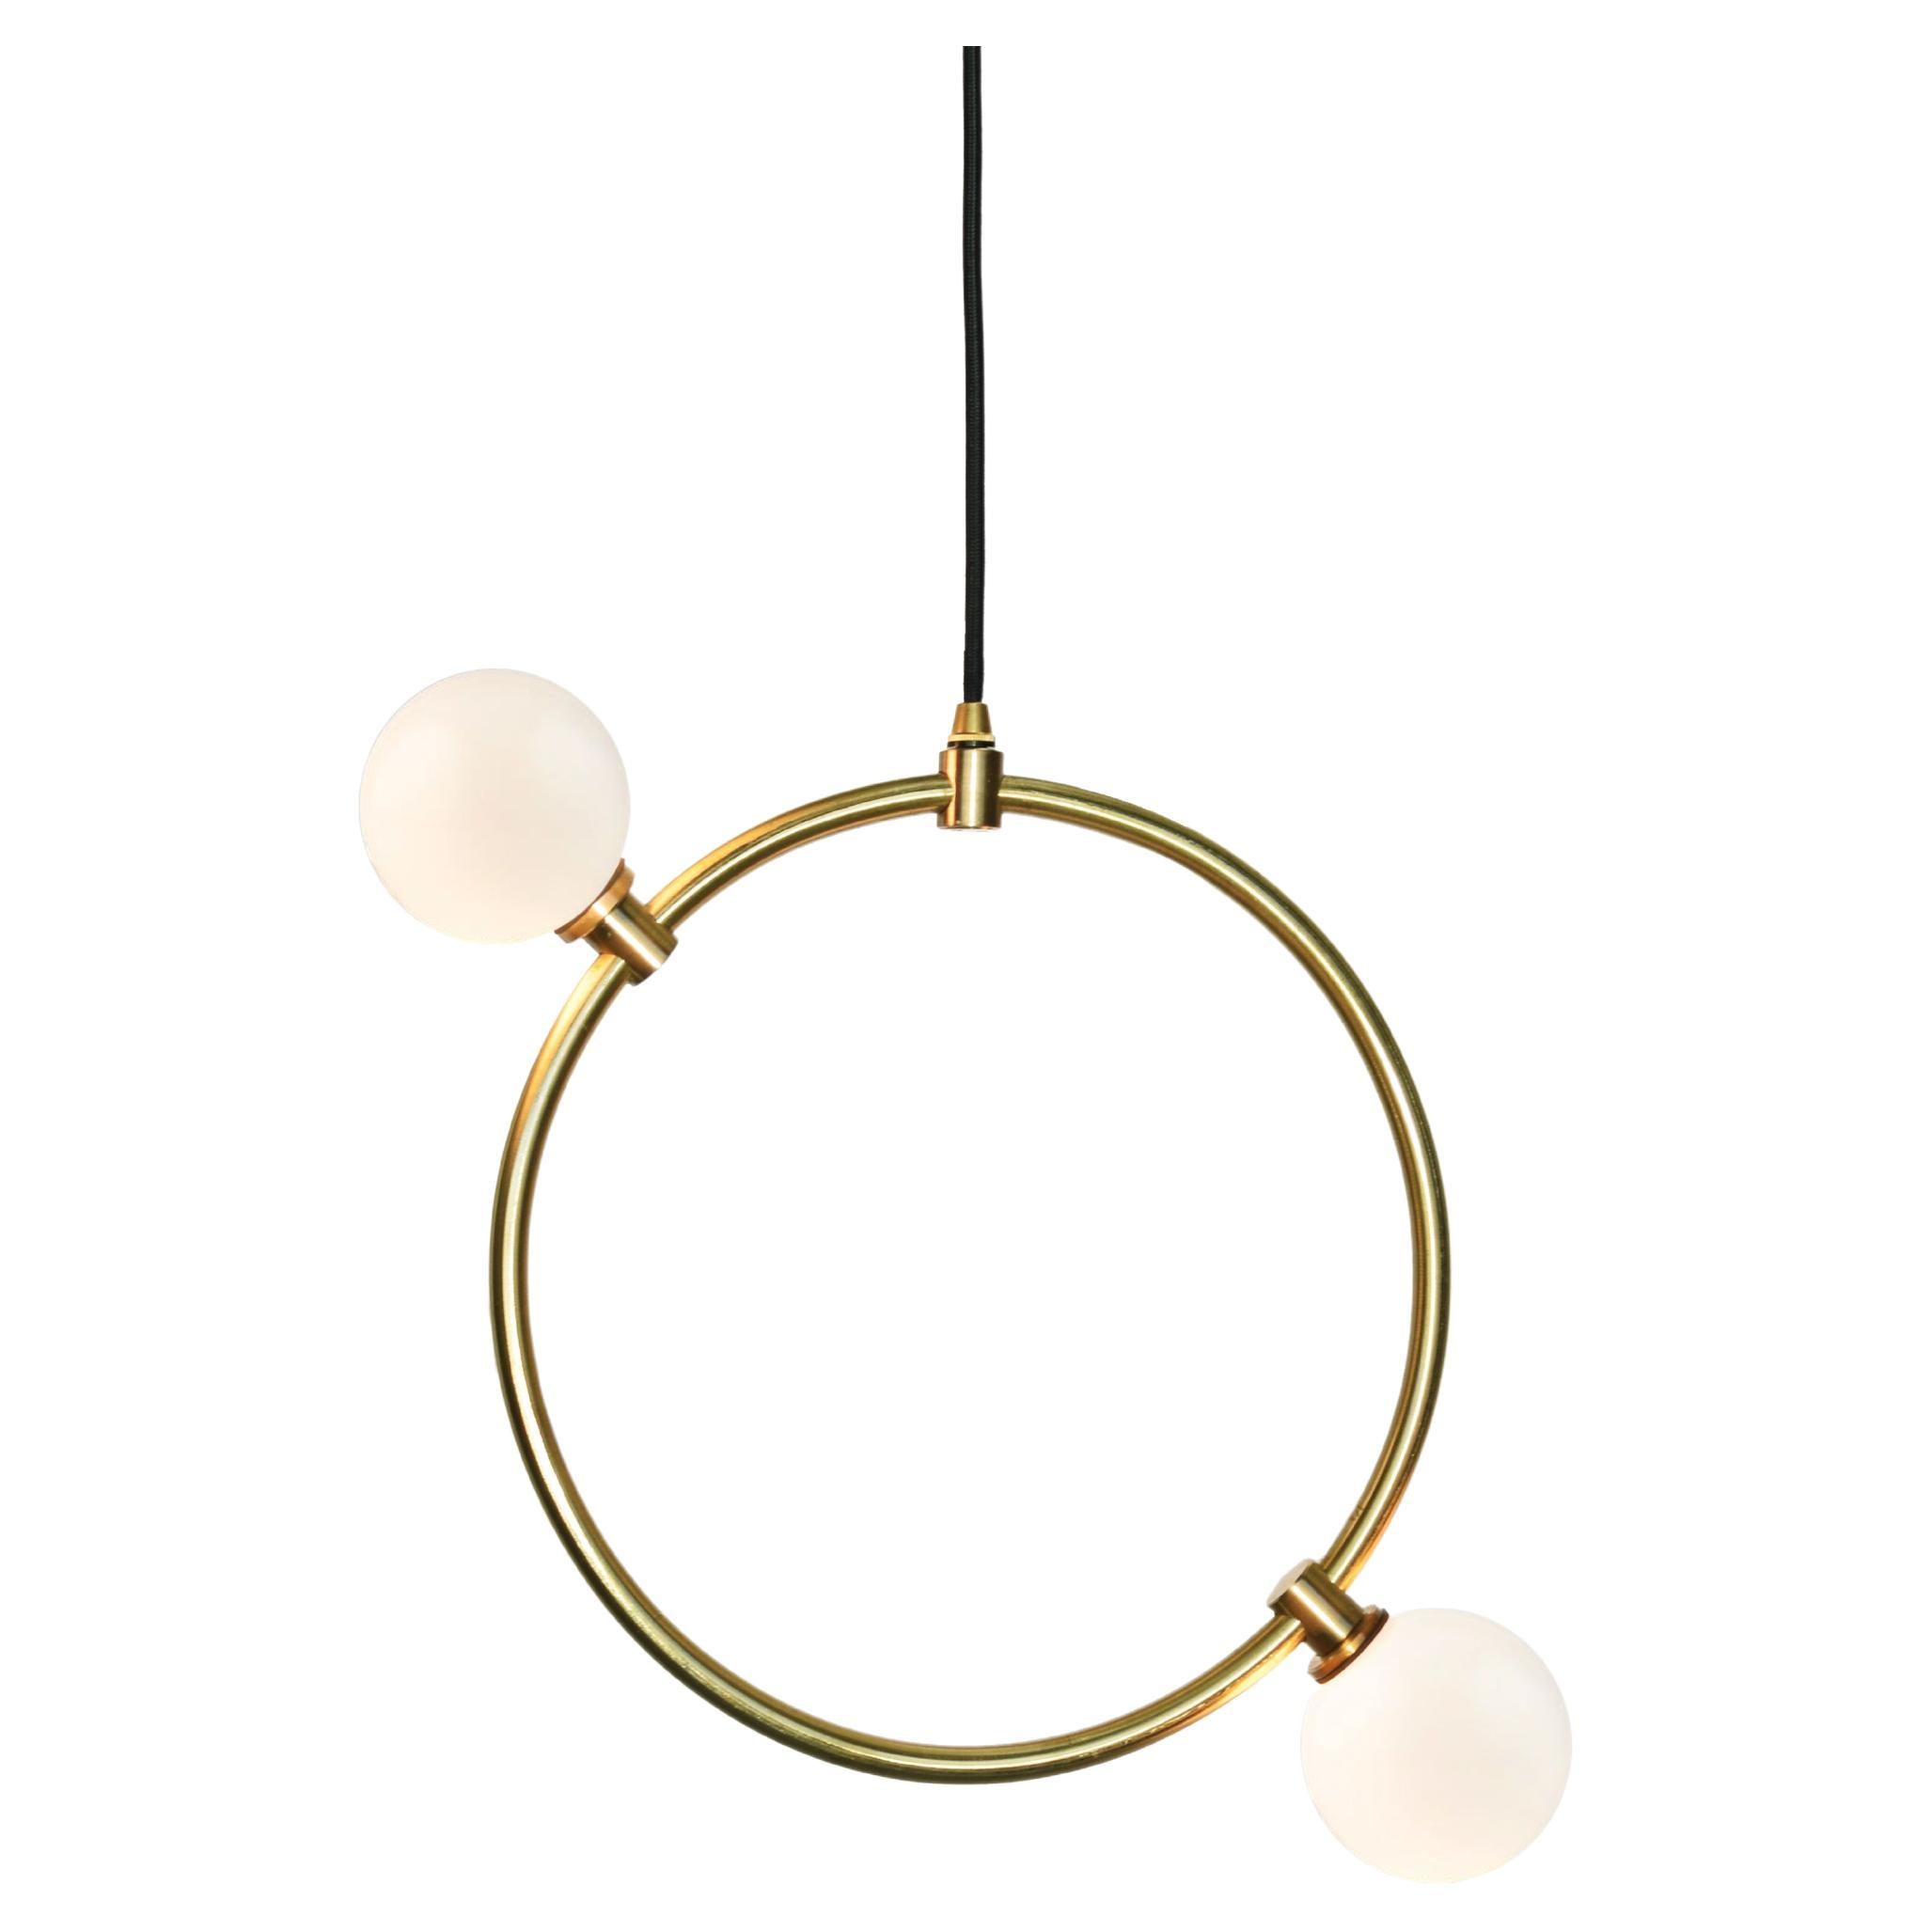 'Drops Pendant Small' by Marc Wood. Handmade Brass Ring Lamps, Opal Glass Shades